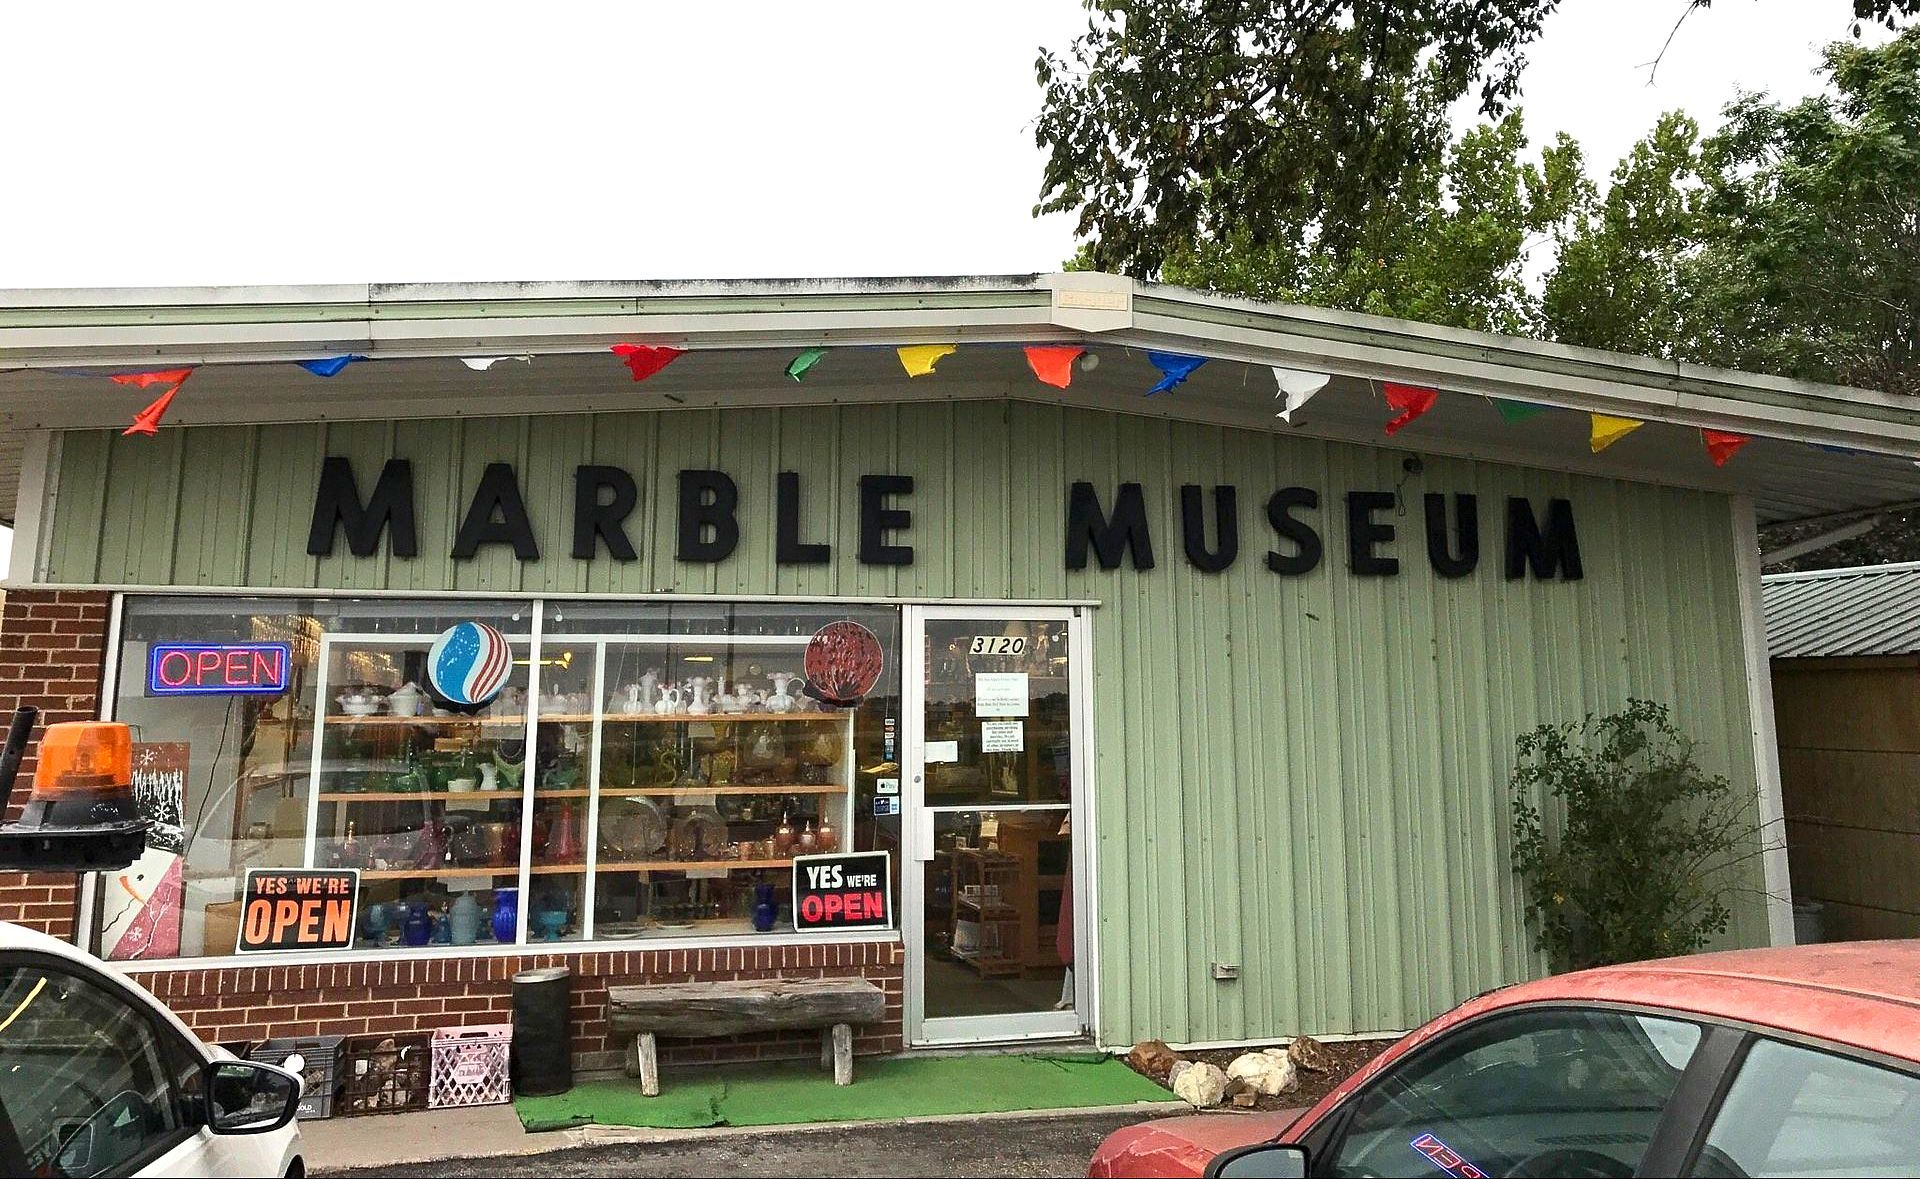 
World’s Largest Collection of Marbles: world record in York, Nebraska